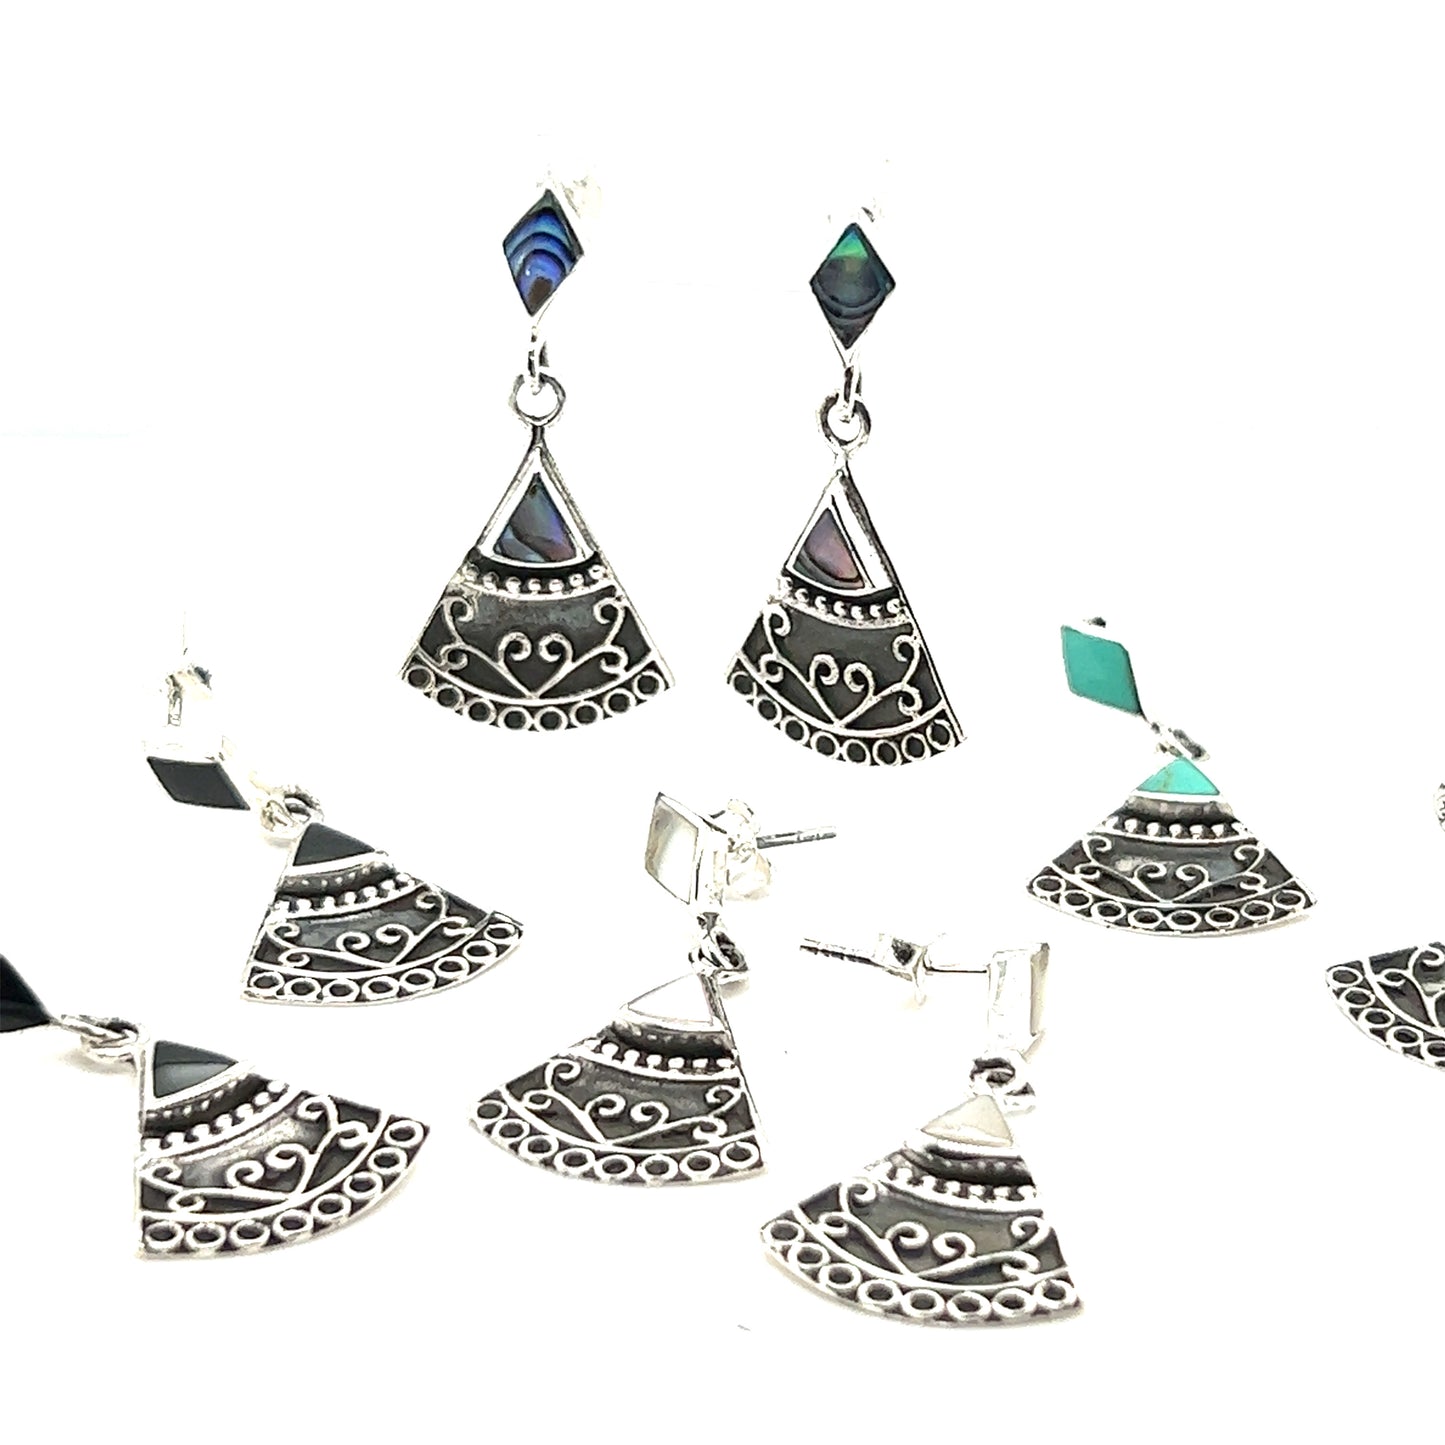 A set of Bohemian Style Filigree Earrings with Inlay Stones from Super Silver, with geometric designs and inlaid stones.